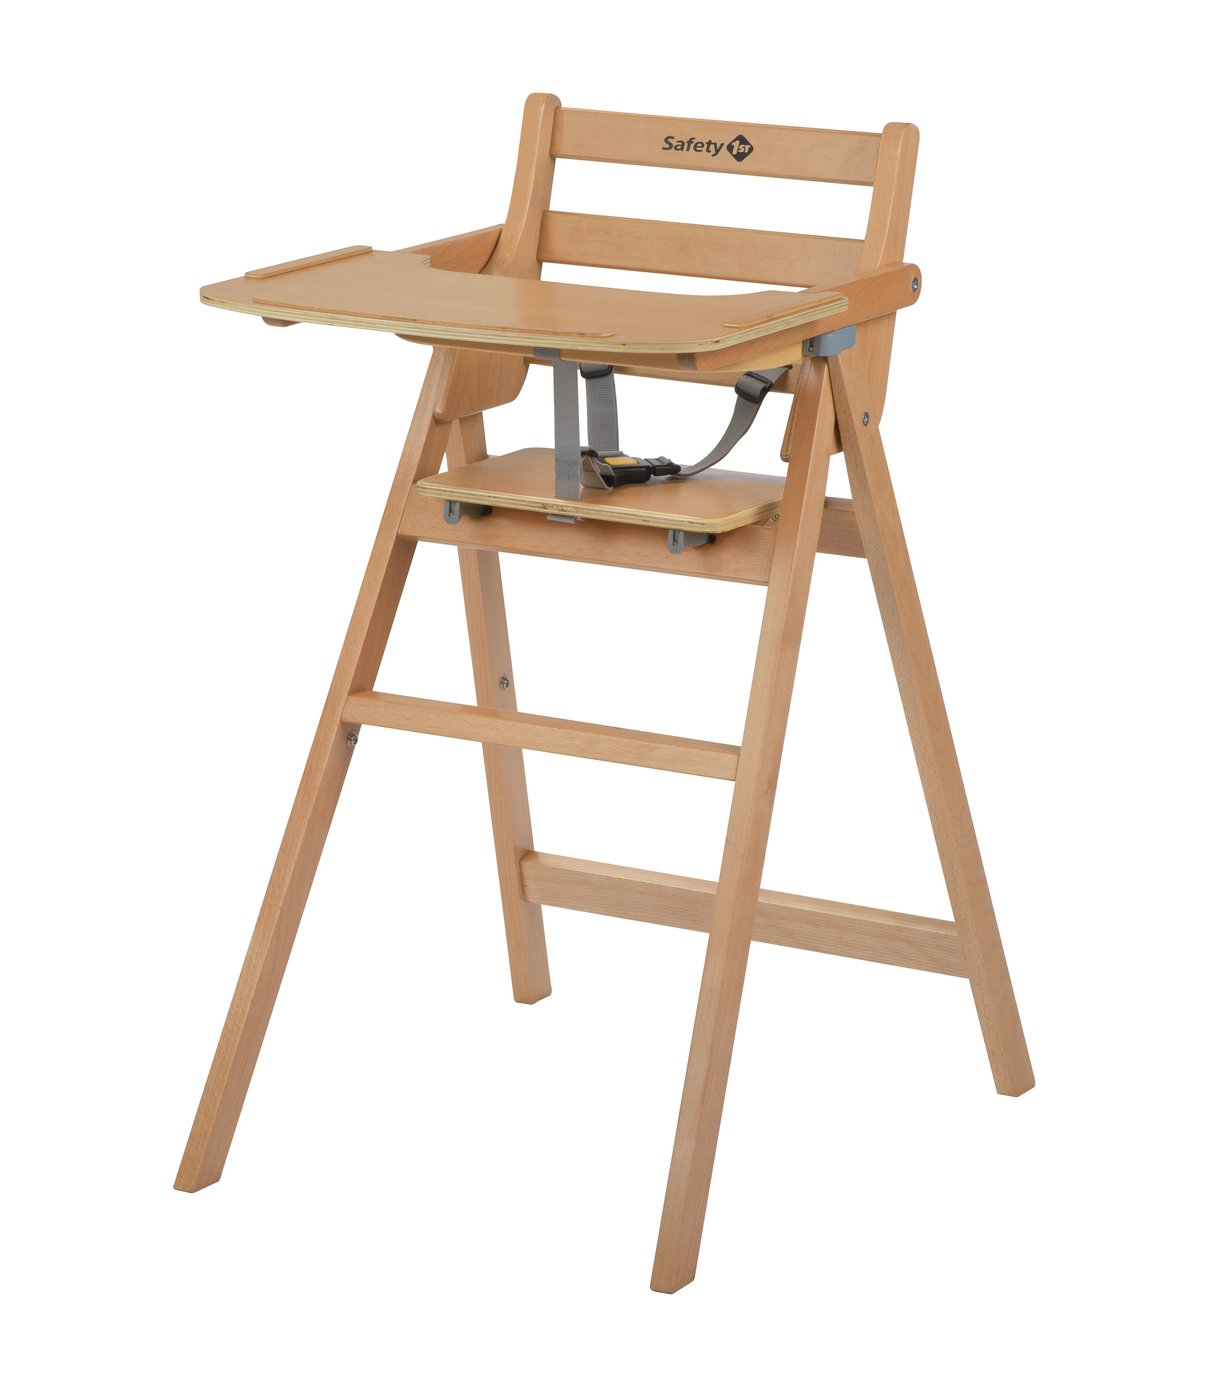 Safety 1st Nordik Wooden Highchair Review